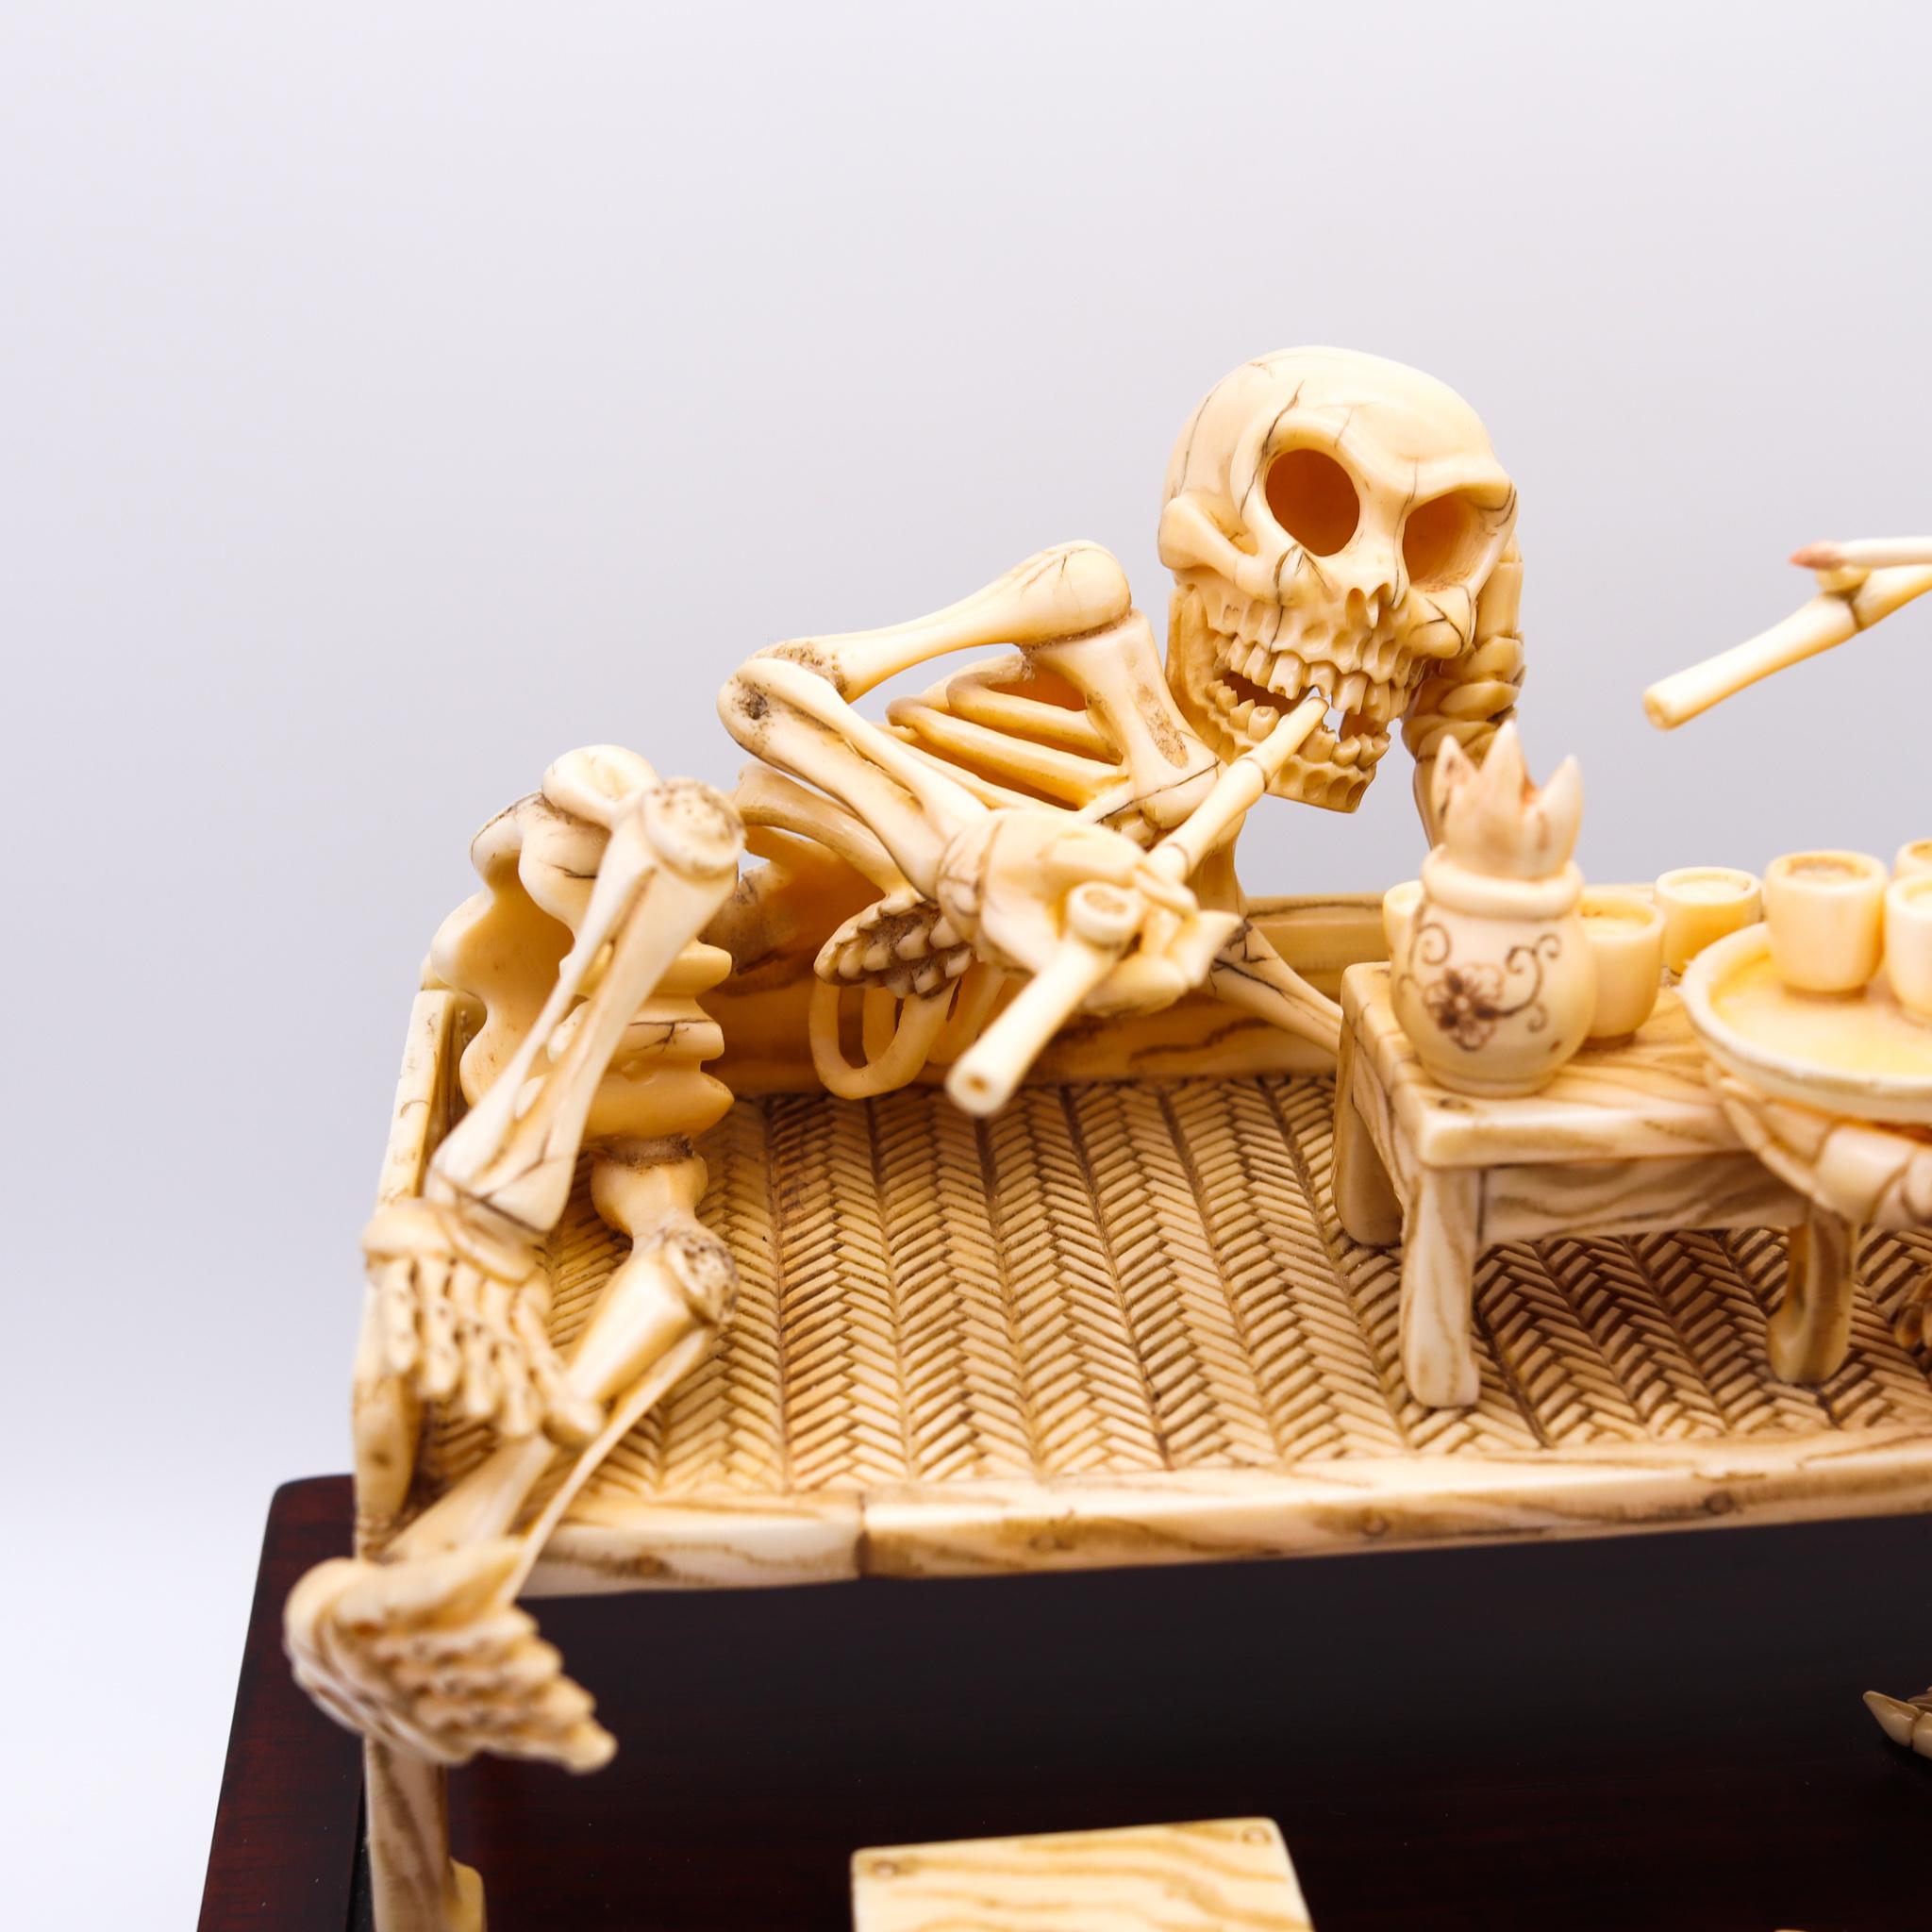 Wood Japan 1890 Meiji Period Signed Okimono Sculpture of a Group of Skeletons Smoking For Sale